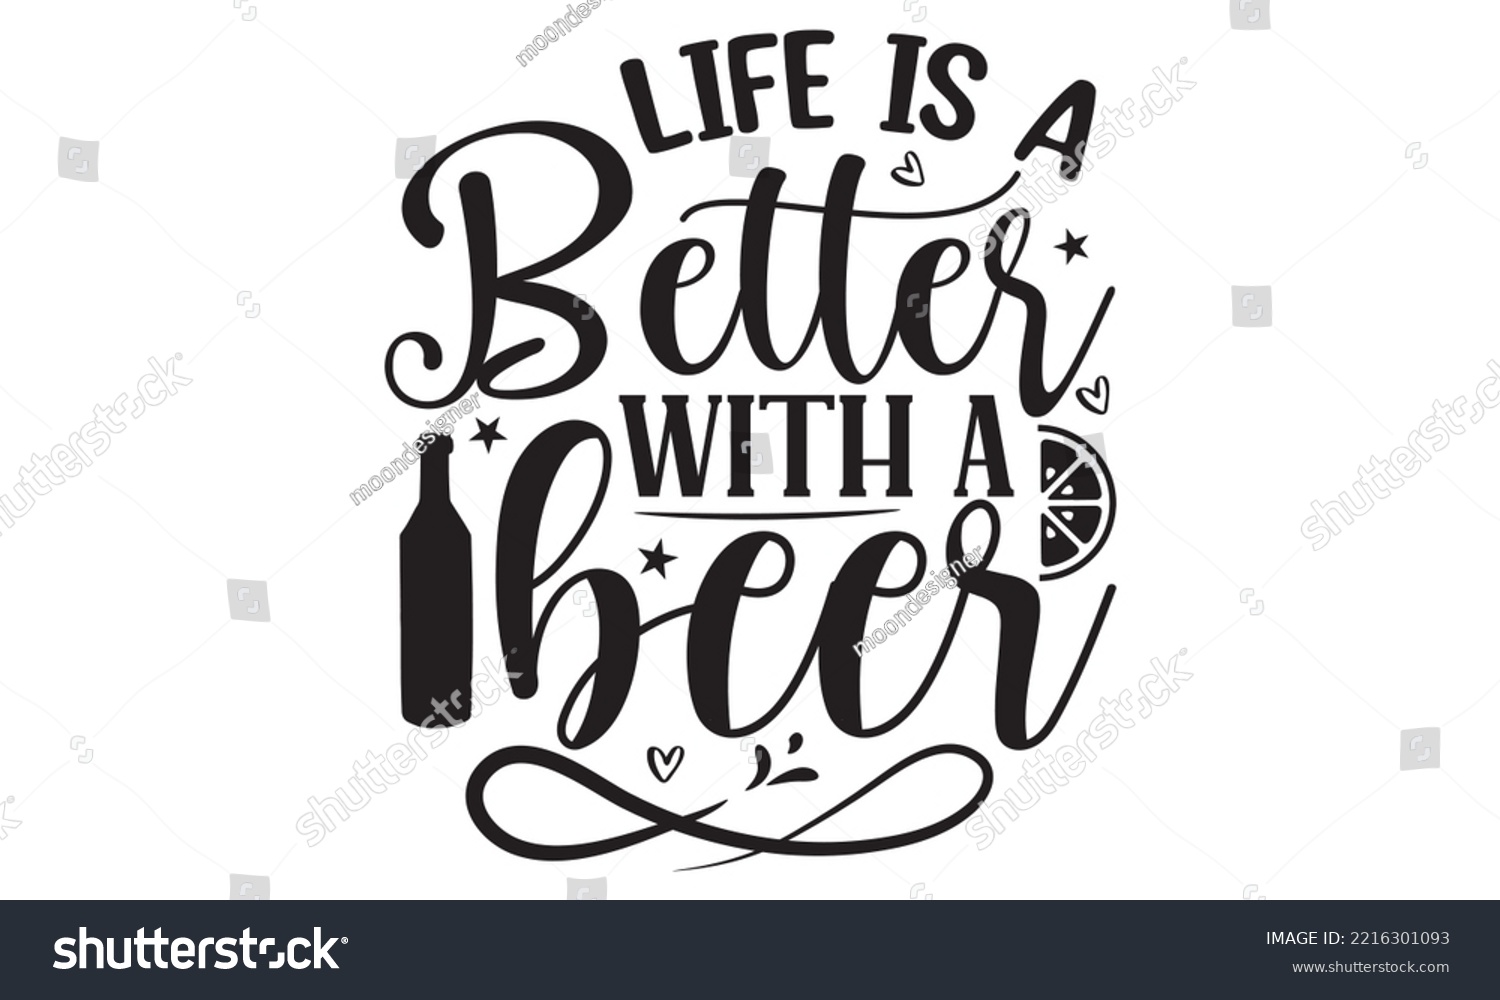 SVG of Life is a better with a beer - Alcohol SVG T Shirt design, Girl Beer Design, Prost, Pretzels and Beer, Vector EPS Editable Files, Alcohol funny quotes, Oktoberfest Alcohol SVG design,  EPS 10 svg